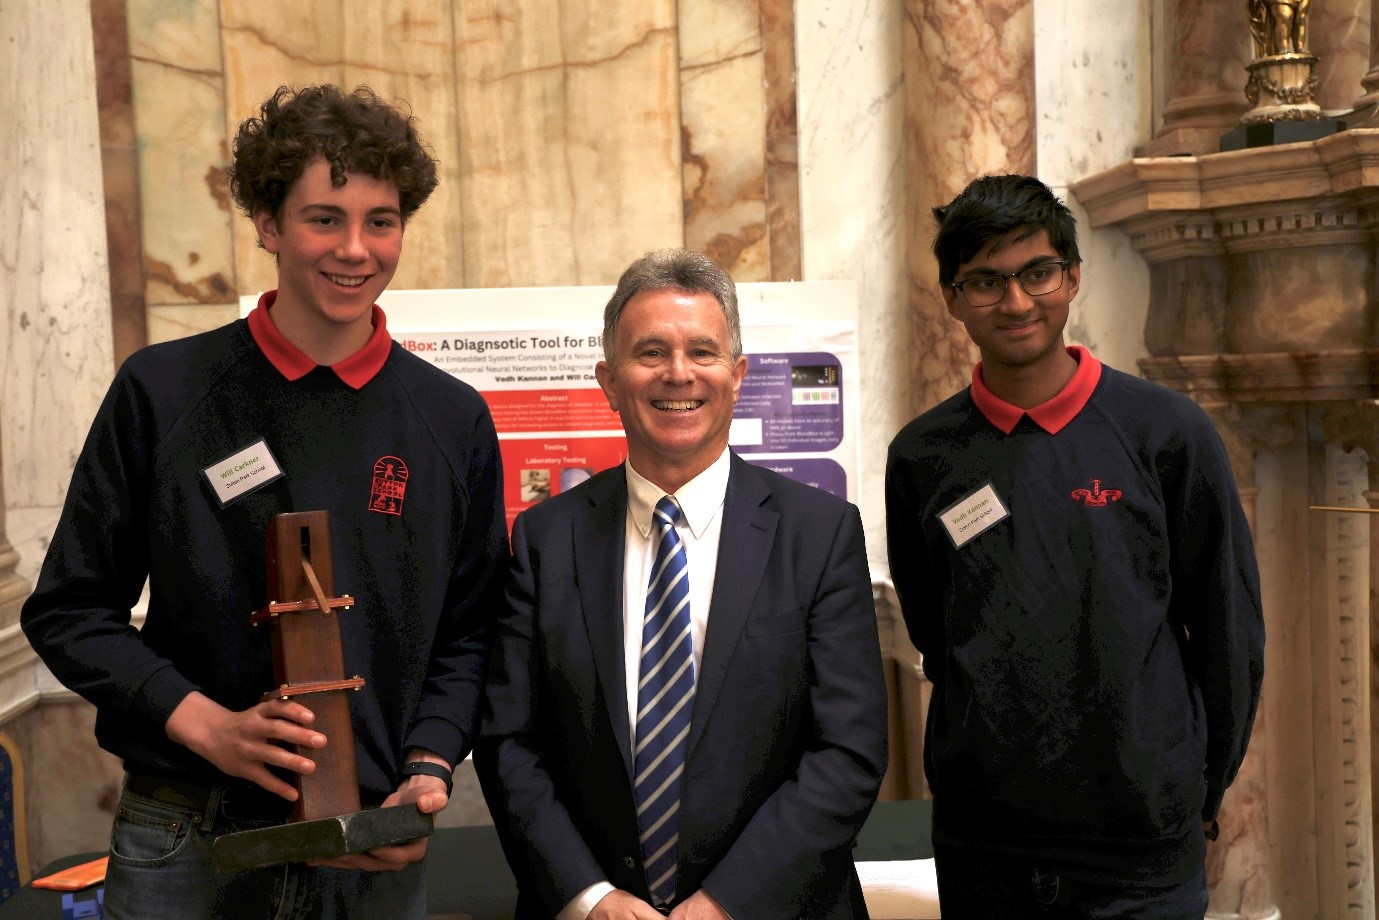 Winners of the Science for Development Award 2023 Will Carkner (left), and Vedh Kannan (right) from Sutton Park School, Dublin pictured with Minister Sean Fleming (center) at the Science for Development showcase 2023.